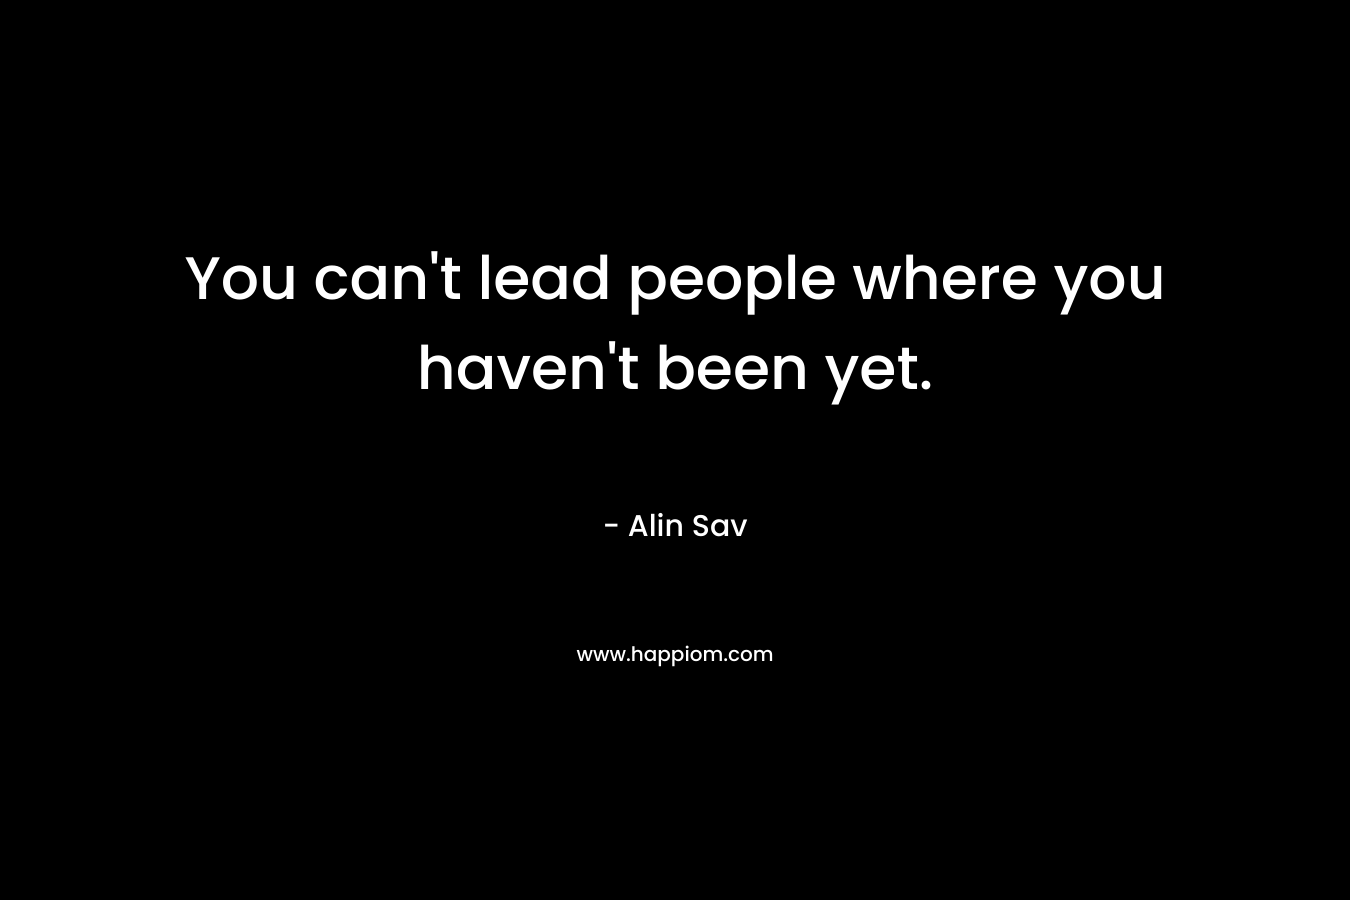 You can't lead people where you haven't been yet.